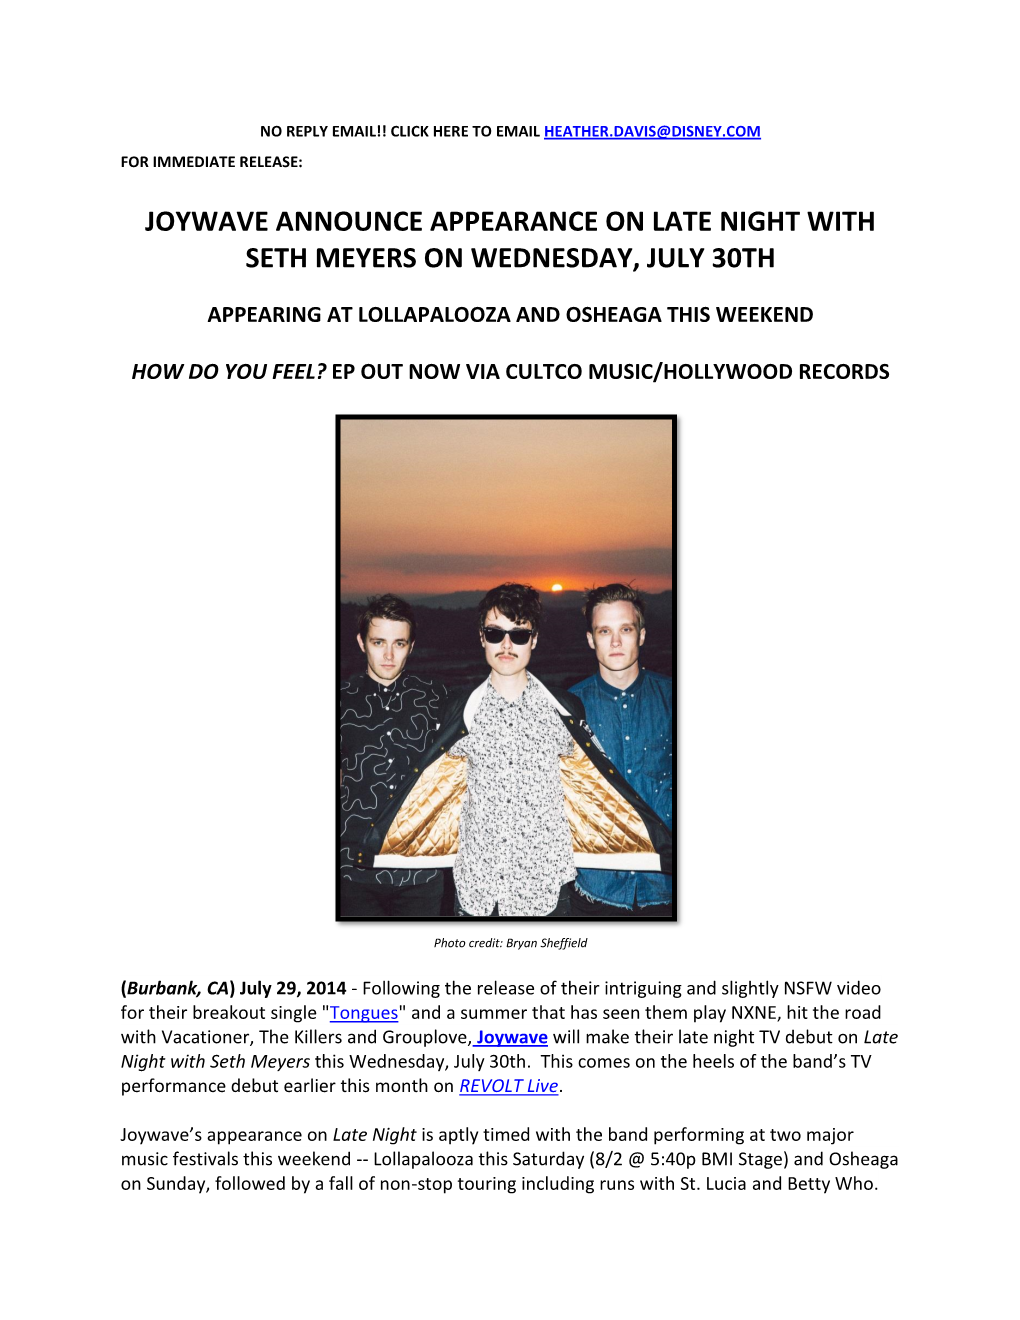 Joywave Announce Appearance on Late Night with Seth Meyers on Wednesday, July 30Th